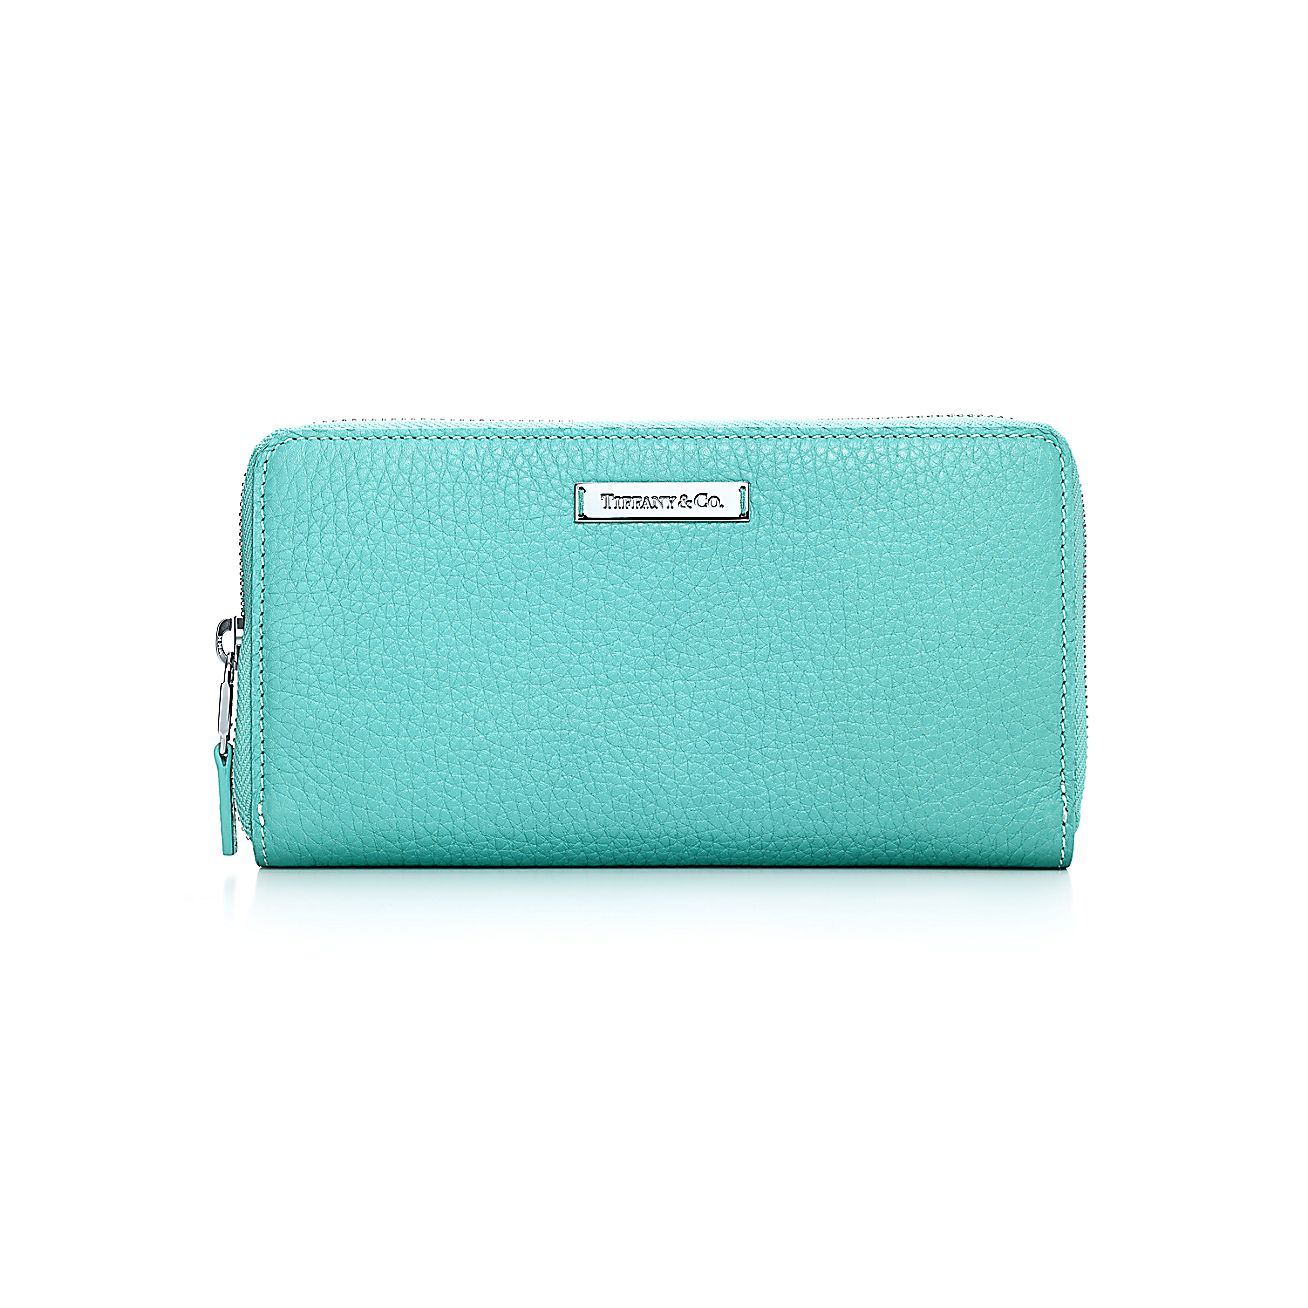 Zip continental wallet in Tiffany Blue grain leather. More colours ...